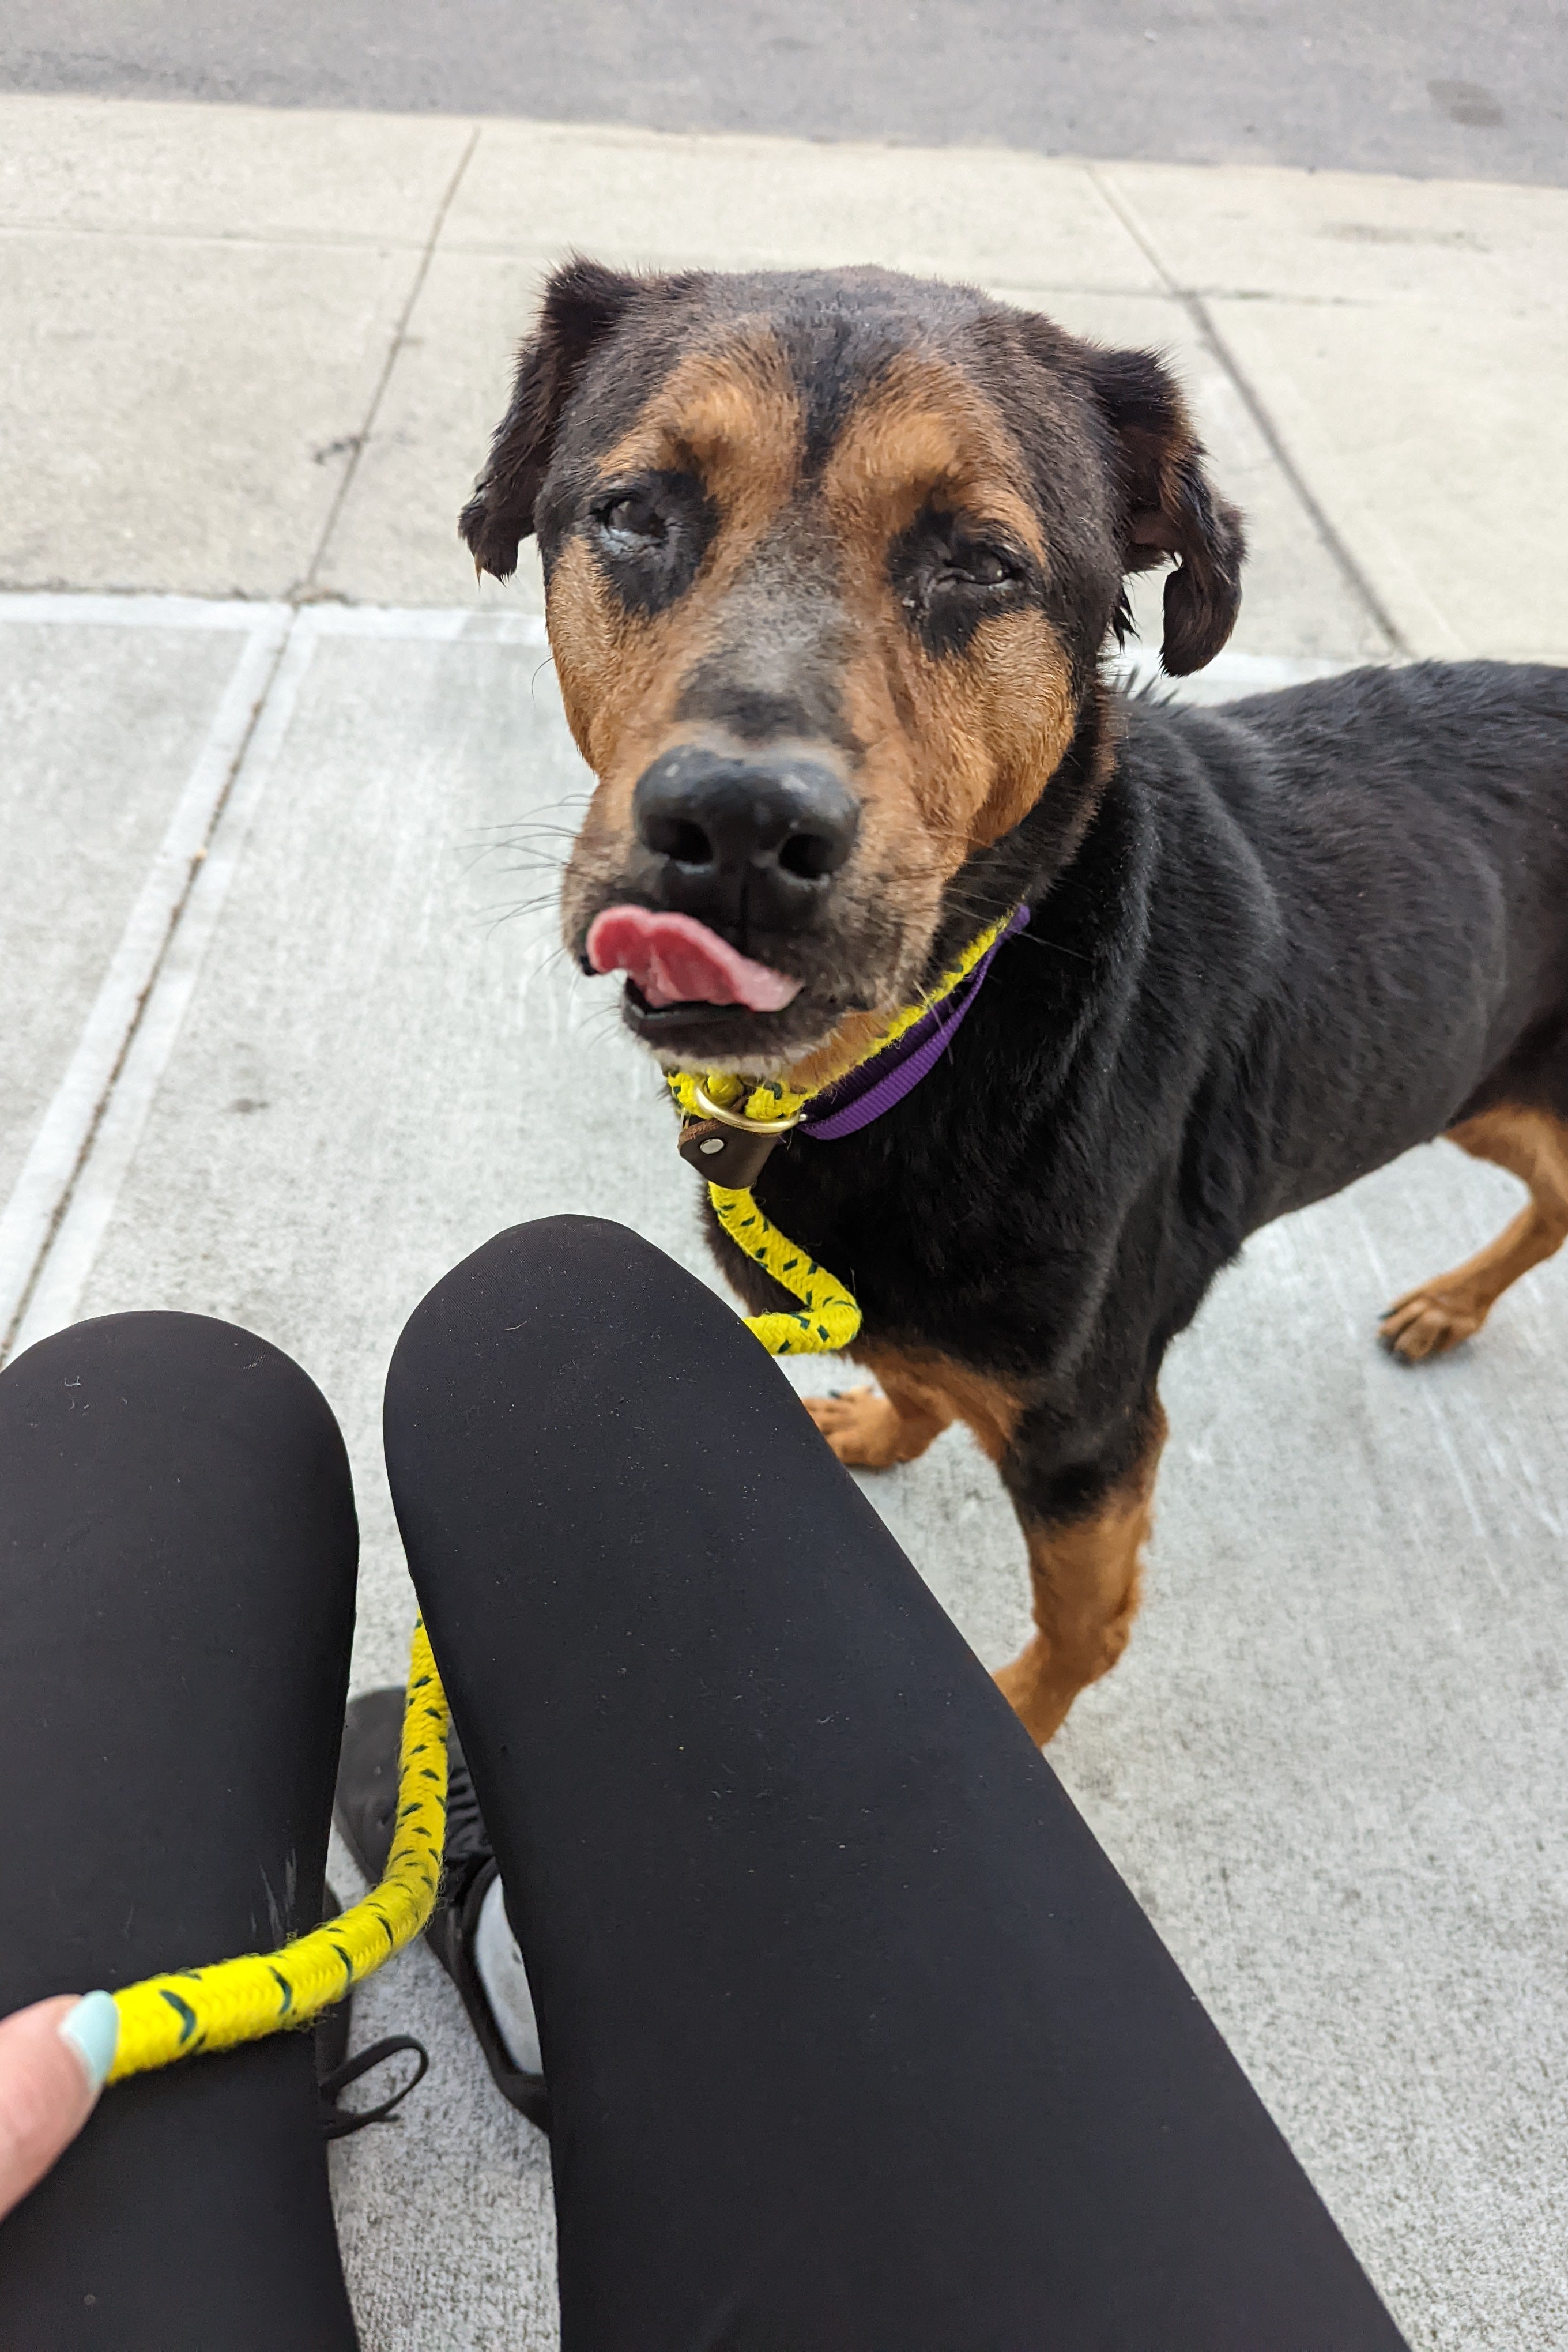 A black and brown dog, tongue out, stares at the camera.